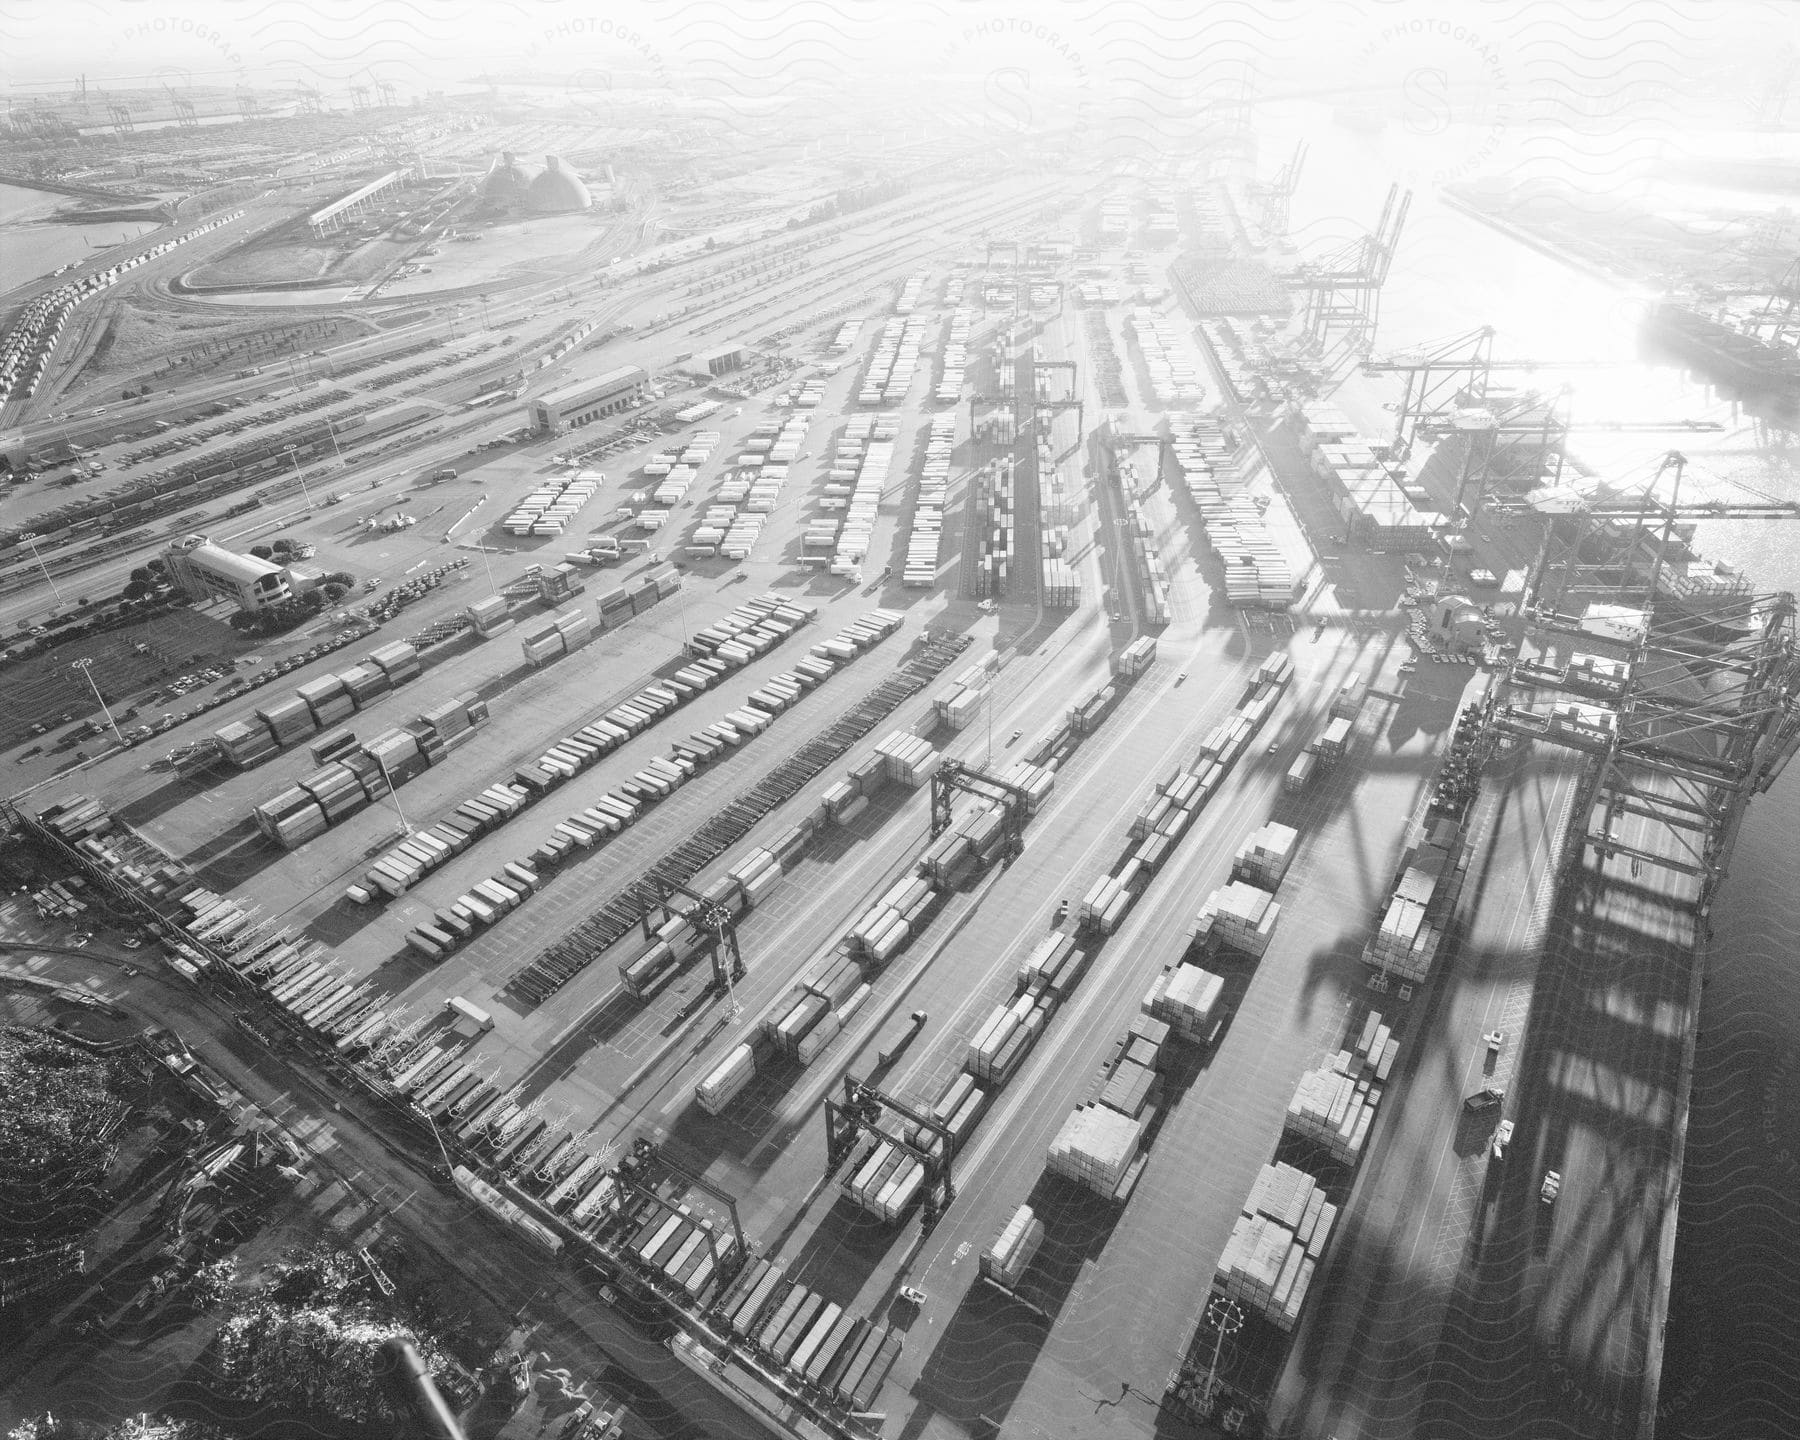 Aerial view of a shipping container port and yard filled with containers in black and white